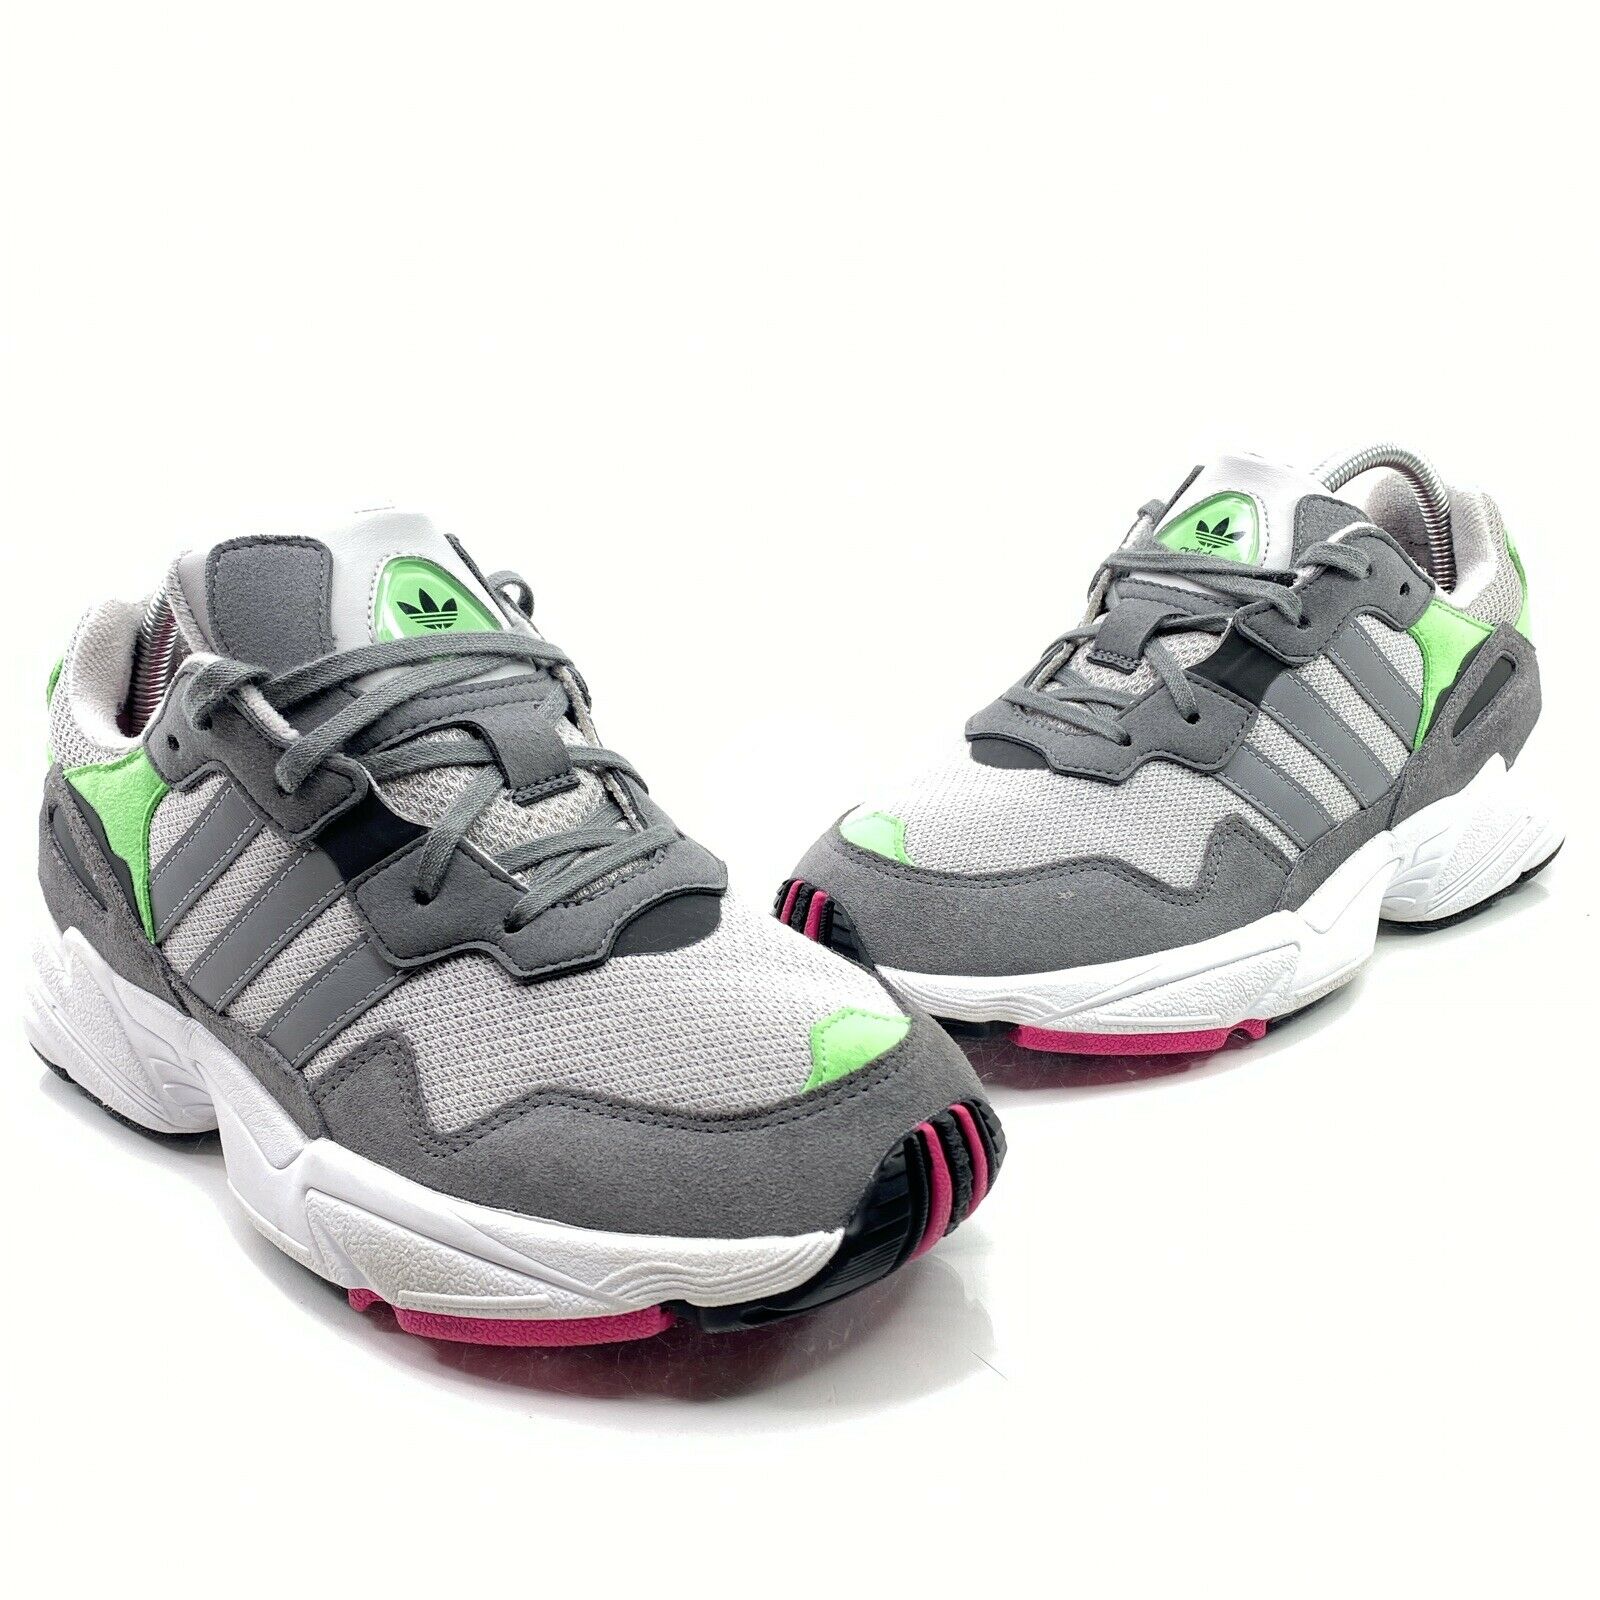 Adidas Yung-96 Youth Size 7 Grey Green Pink Athletic Running Shoes DB2802